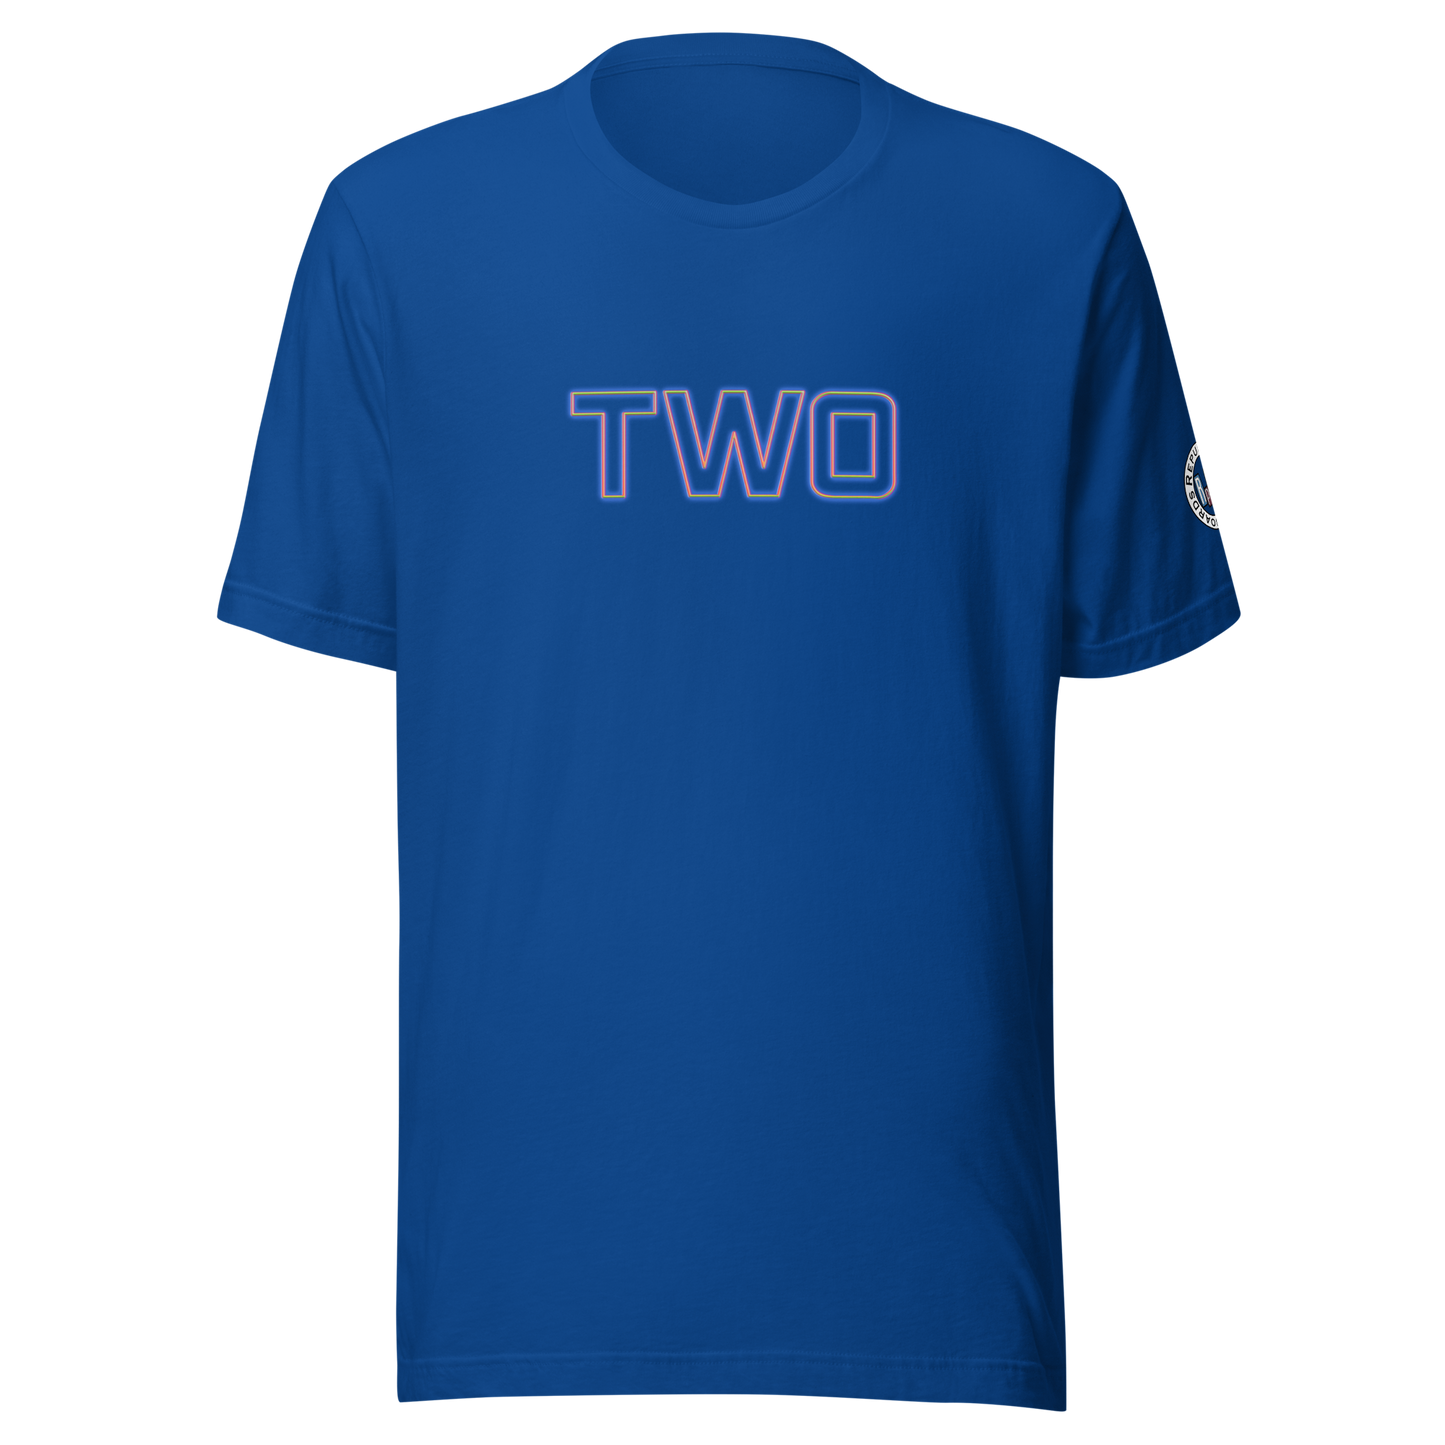 TWO Tee